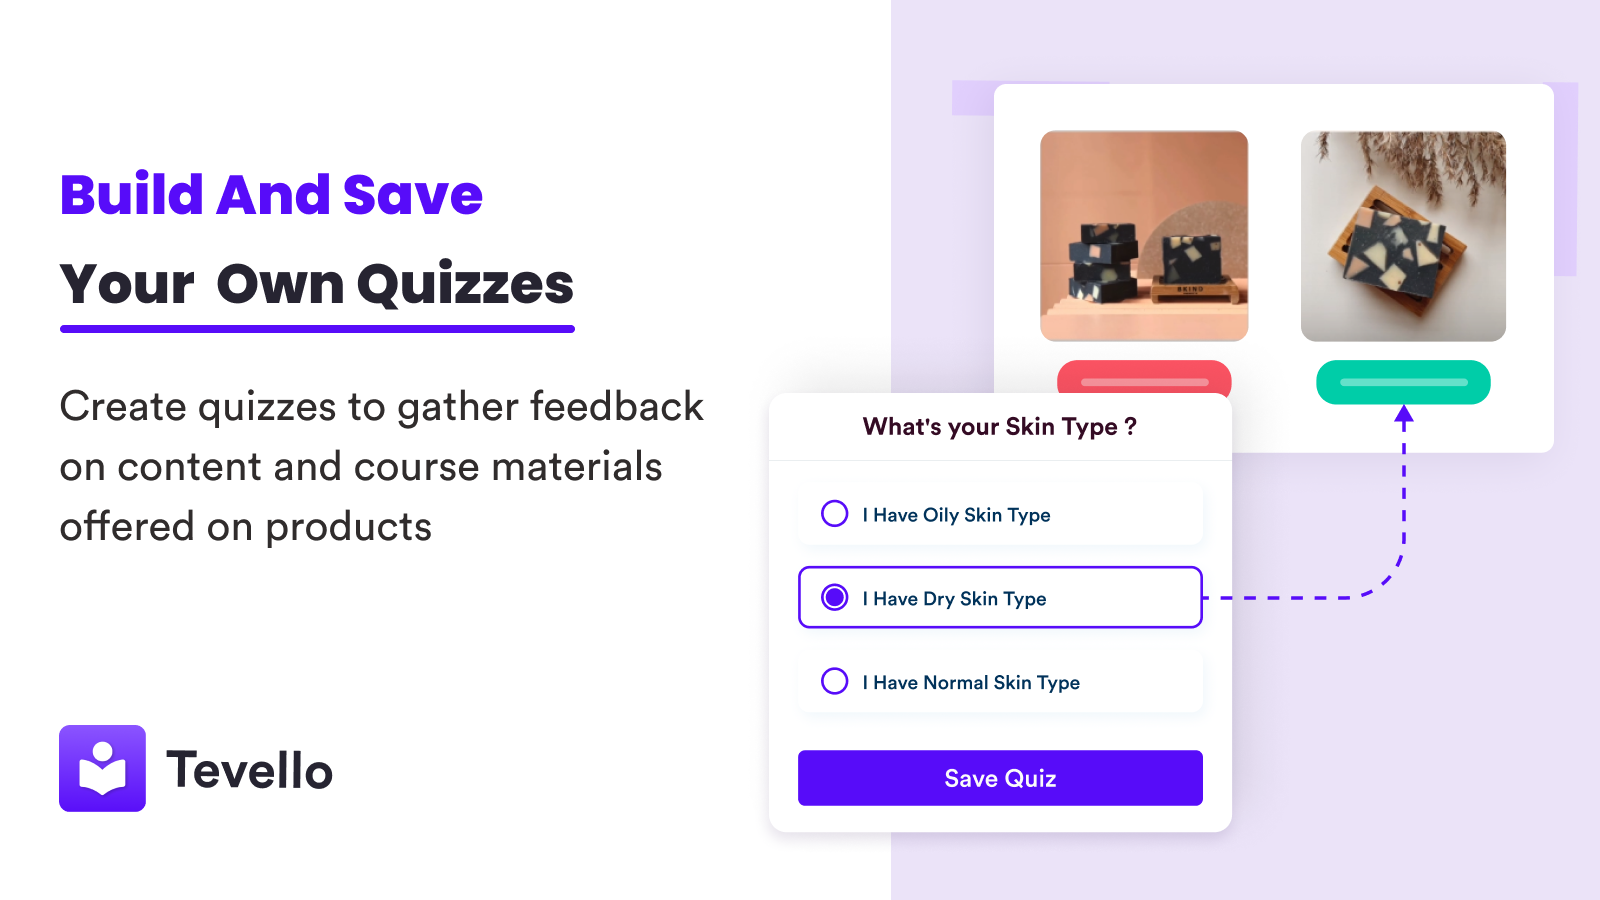 Build And Save Your Own Quizzes